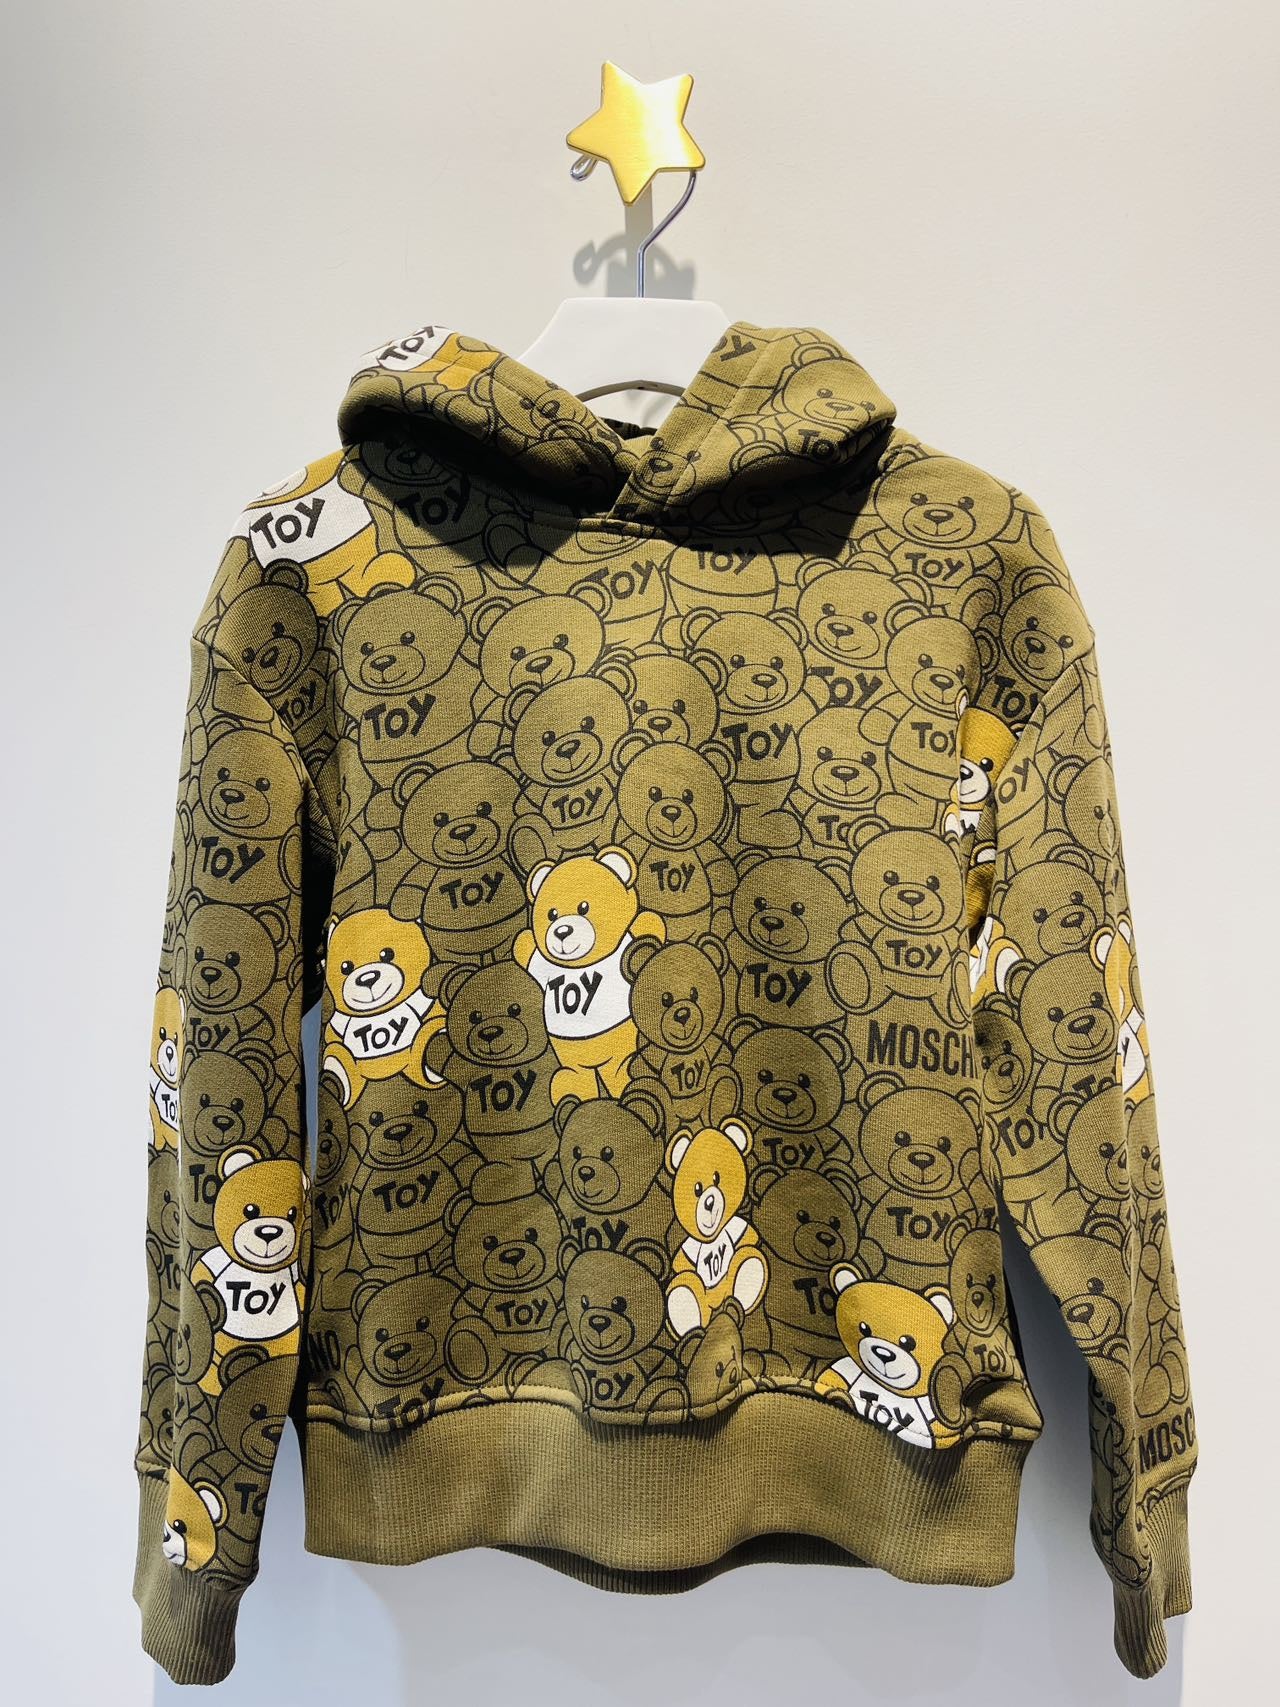 Moschino Hooded Sweatshirt with Allover Printed Bear Dark Oliver